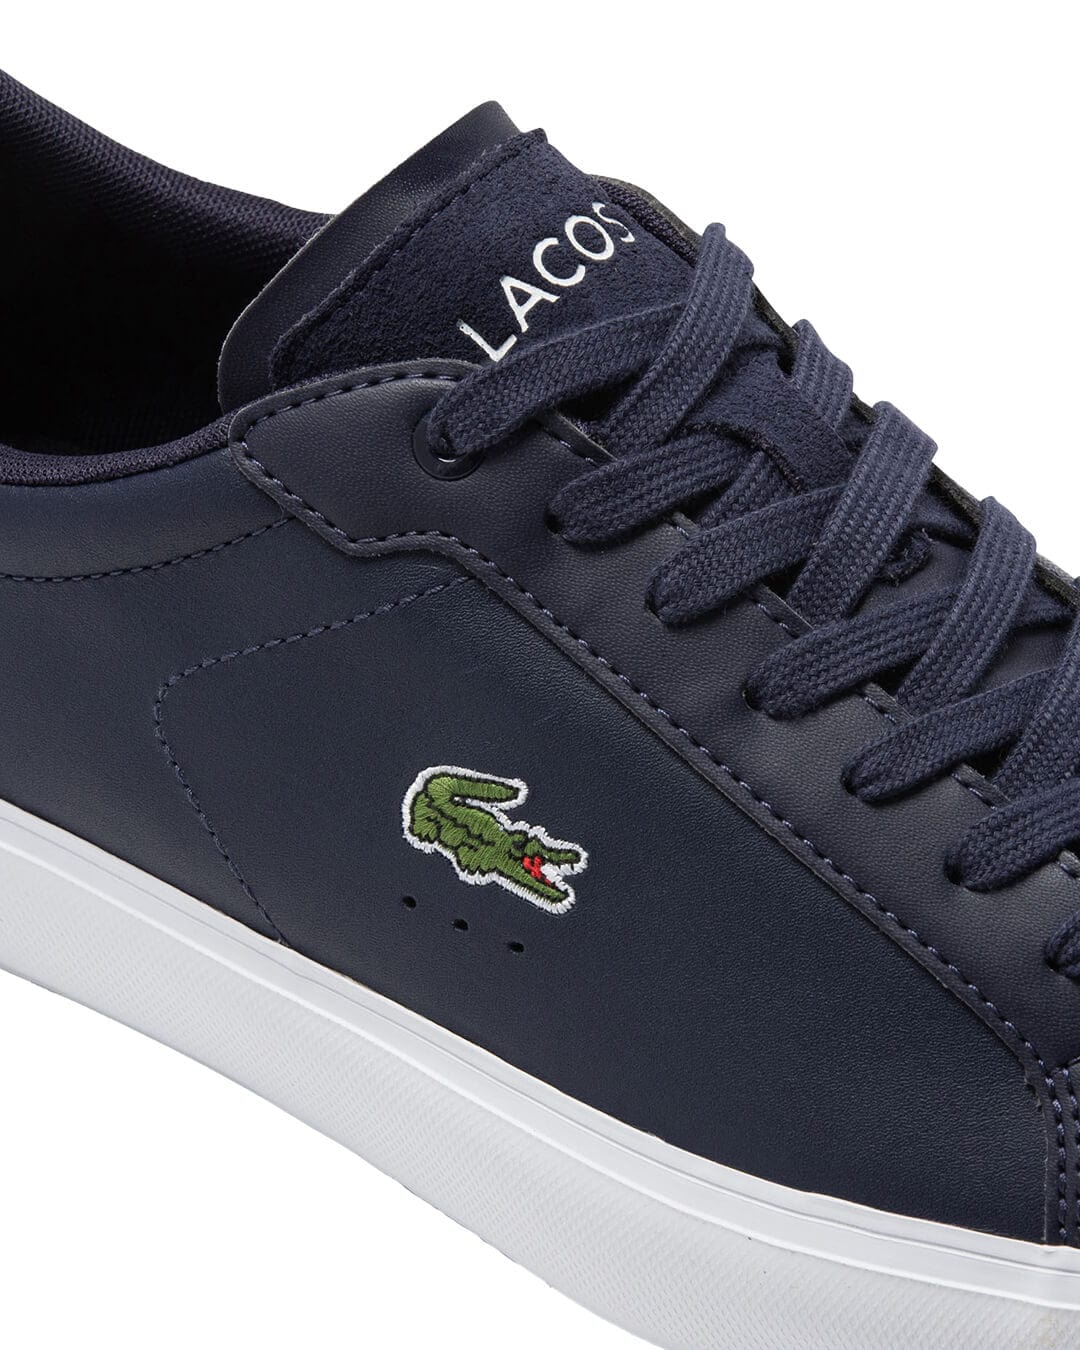 Lacoste Shoes Lacoste Powercourt Leather Navy Block Sneakers